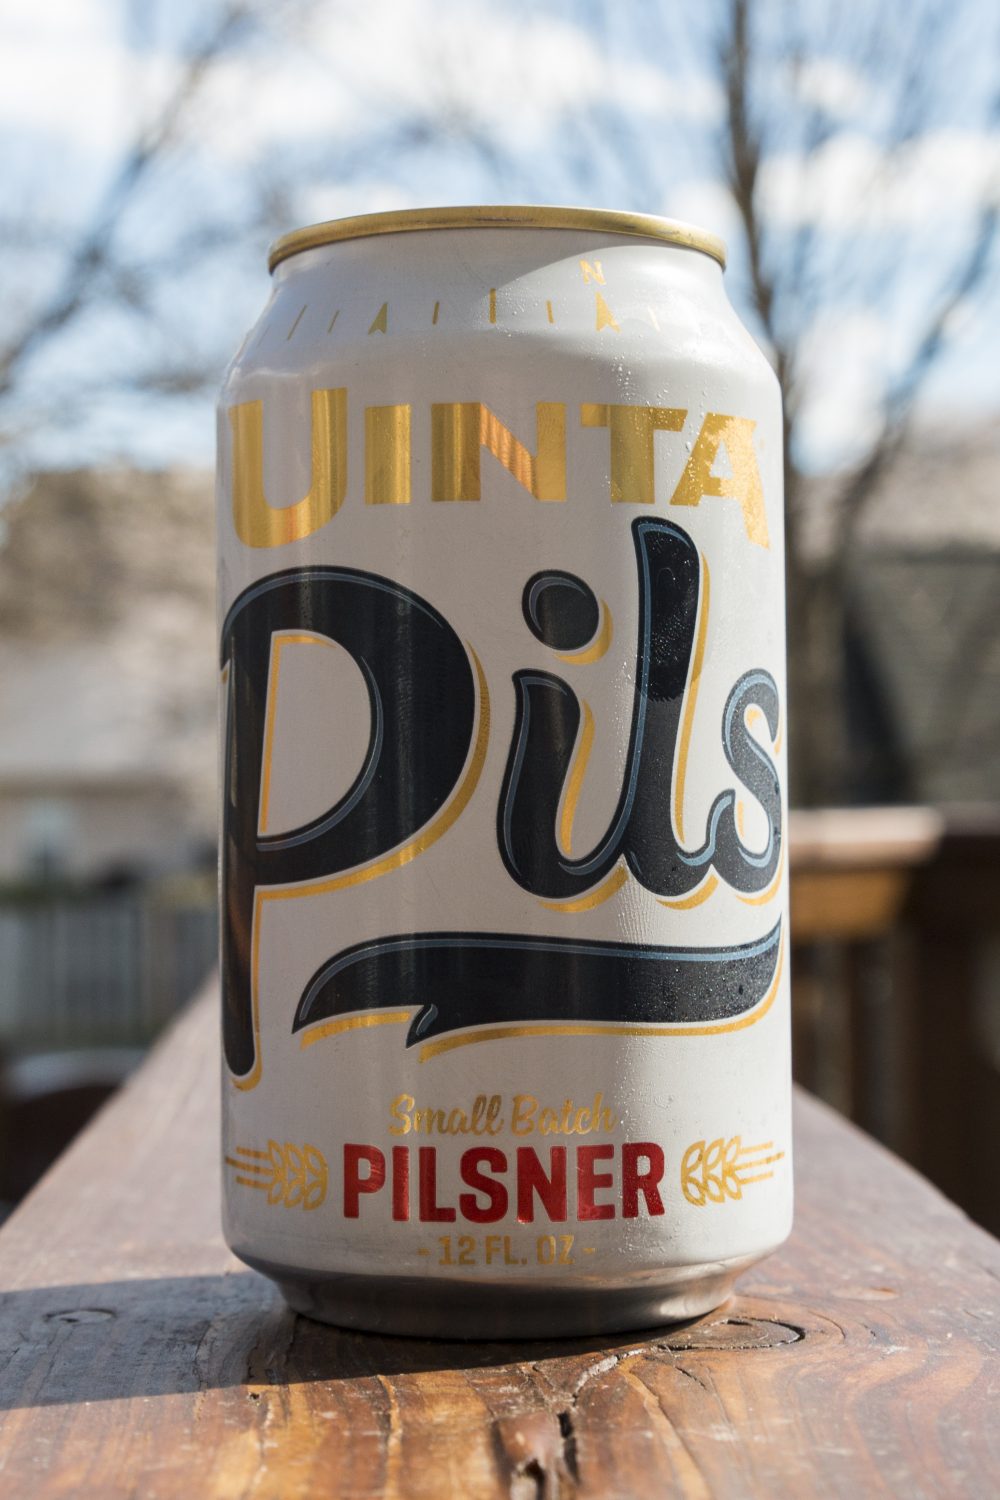 Beer Me: Uinta Brewing Company Pils small batch pilsner